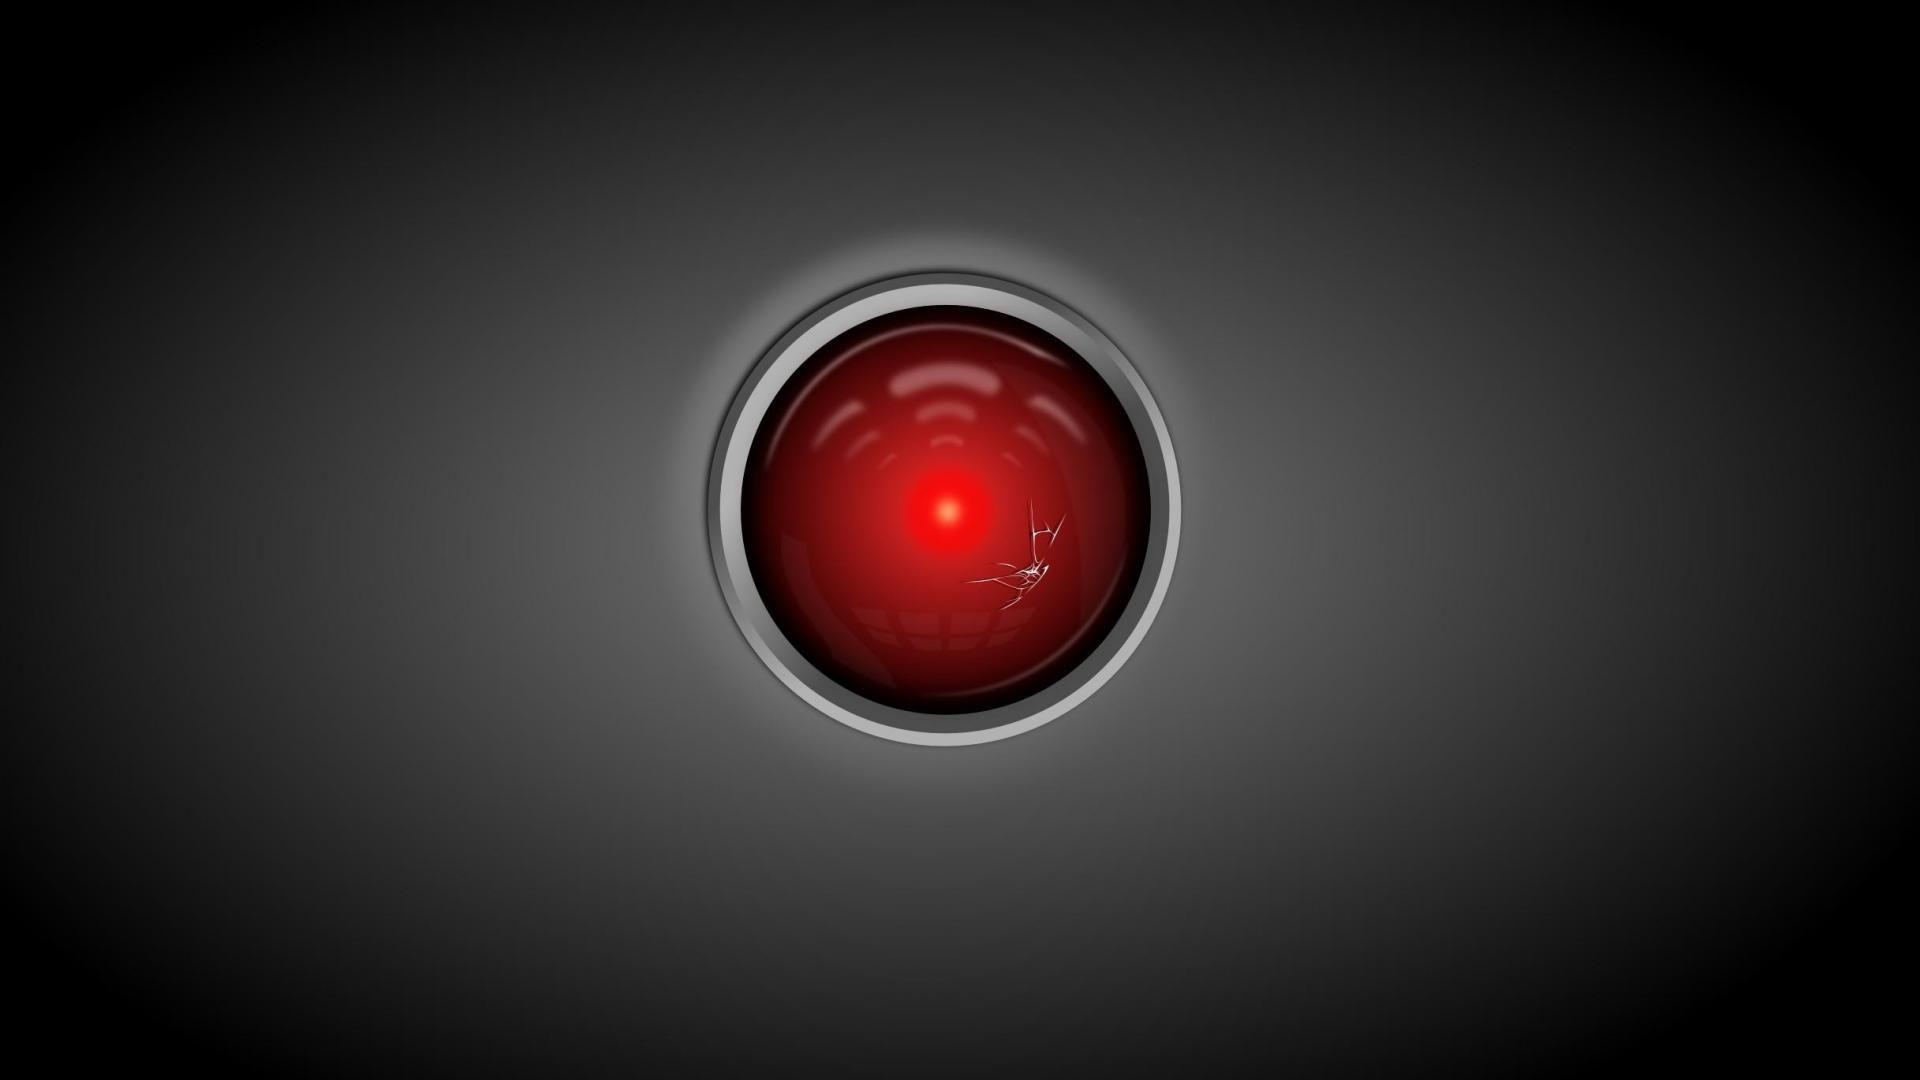 Hal 9000  Cams Character Quotes Day 79 of 100  Twitter cameronbyerly  40962160  rwallpapers